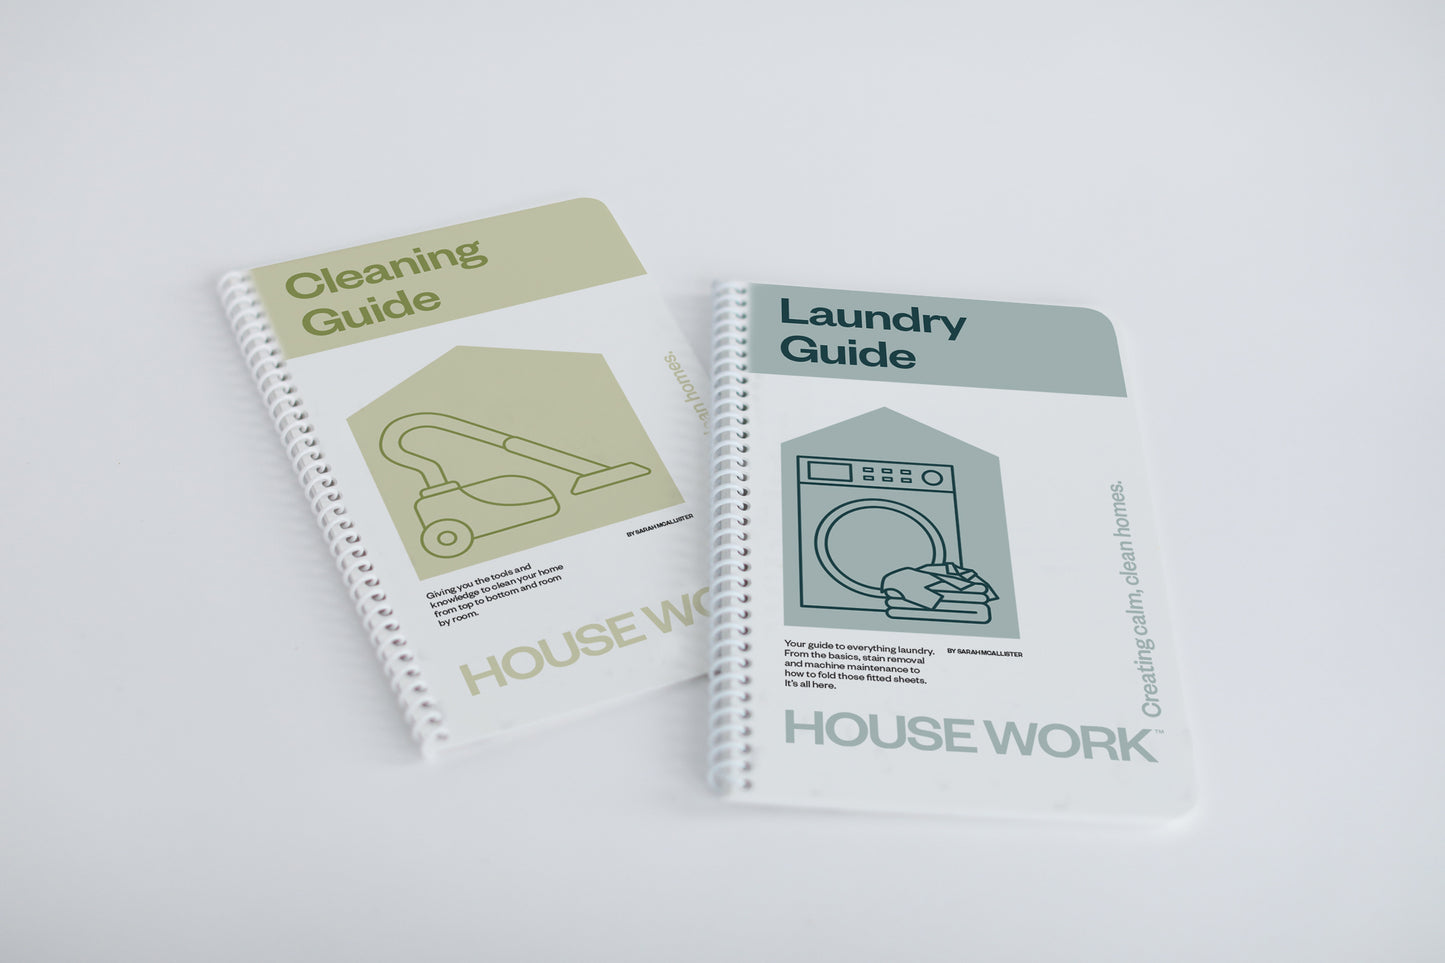 Cleaning + Laundry Guide Bundle (Hard Copy)